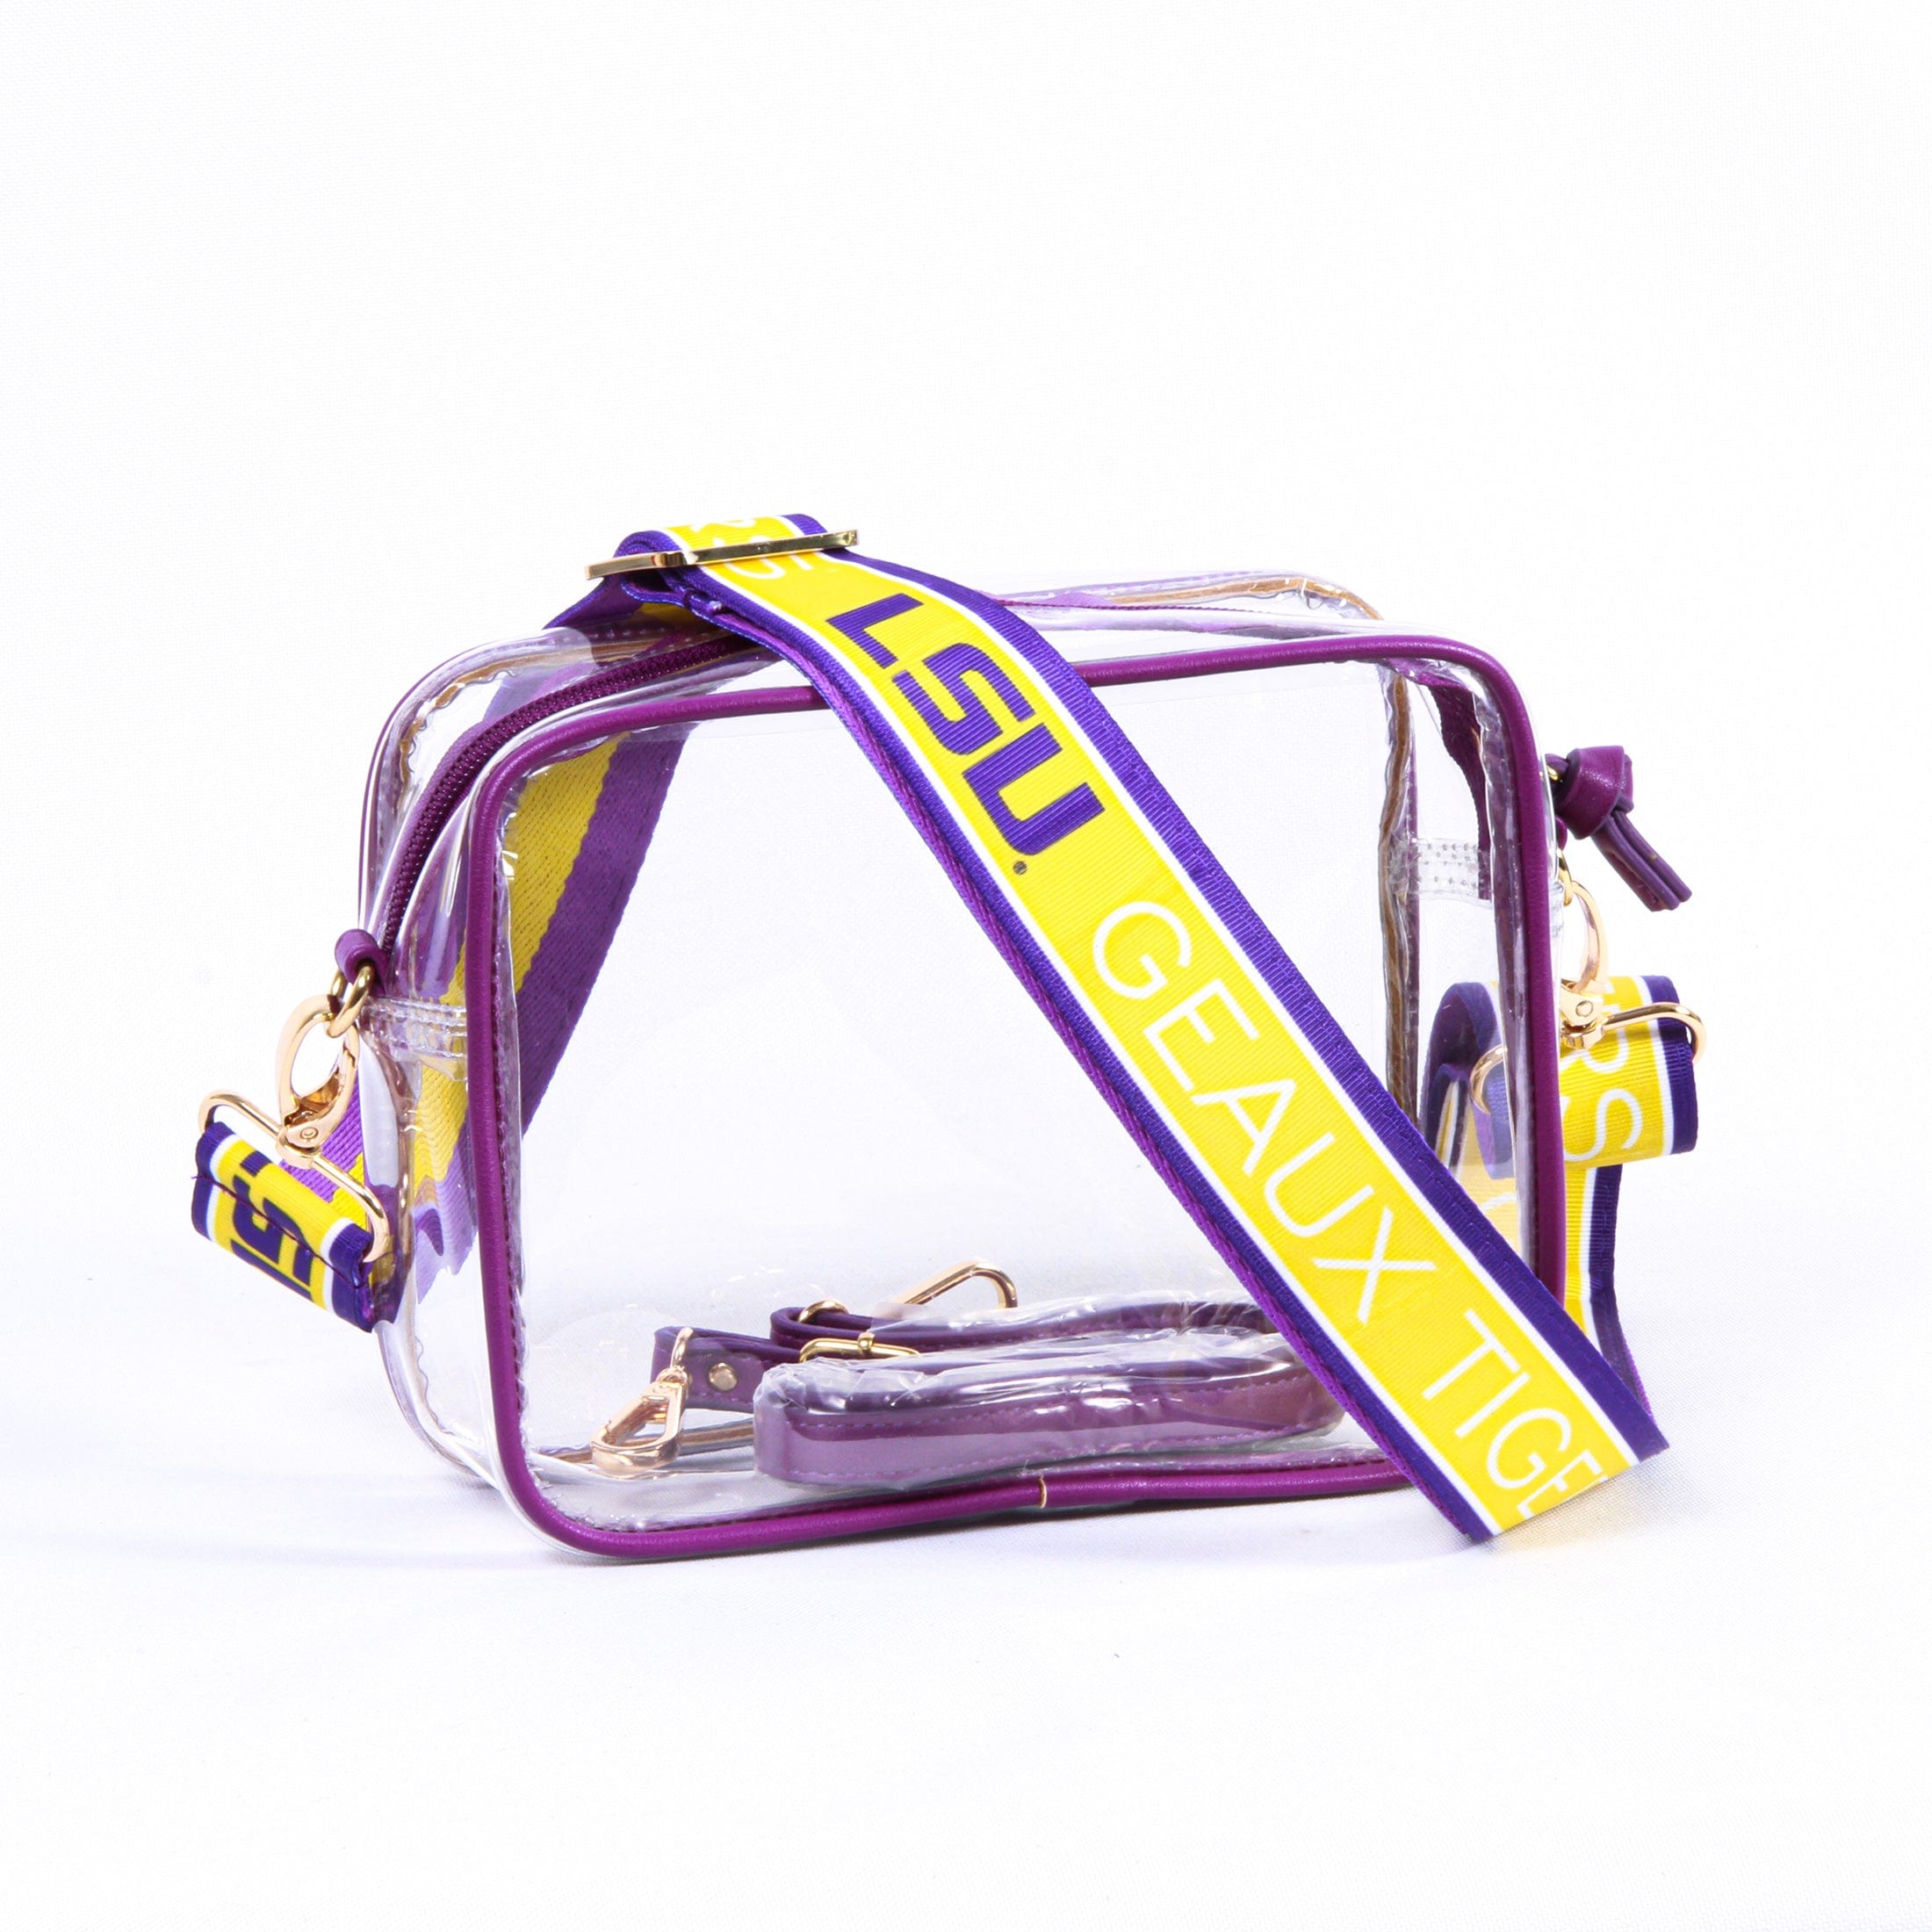 Lexi Clear Purse with Patterned Shoulder Straps - Louisiana Tech